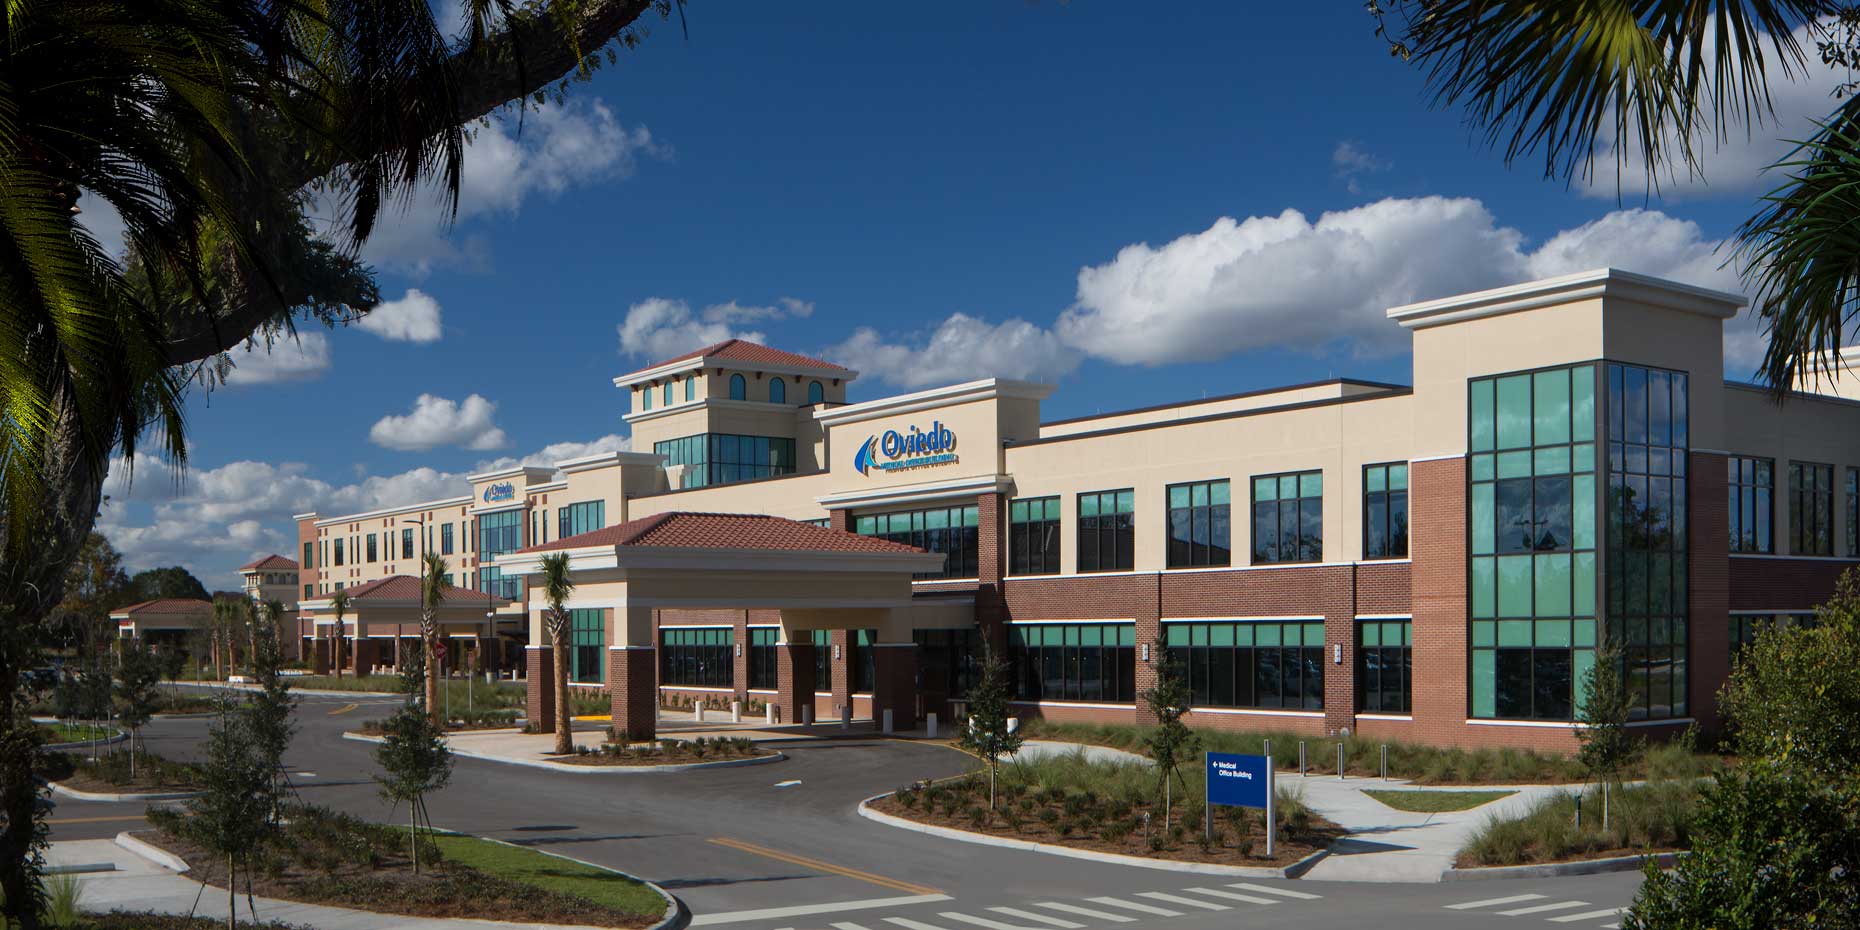 An exterior view of the Oviedo Medical Center in Oviedo, Florida